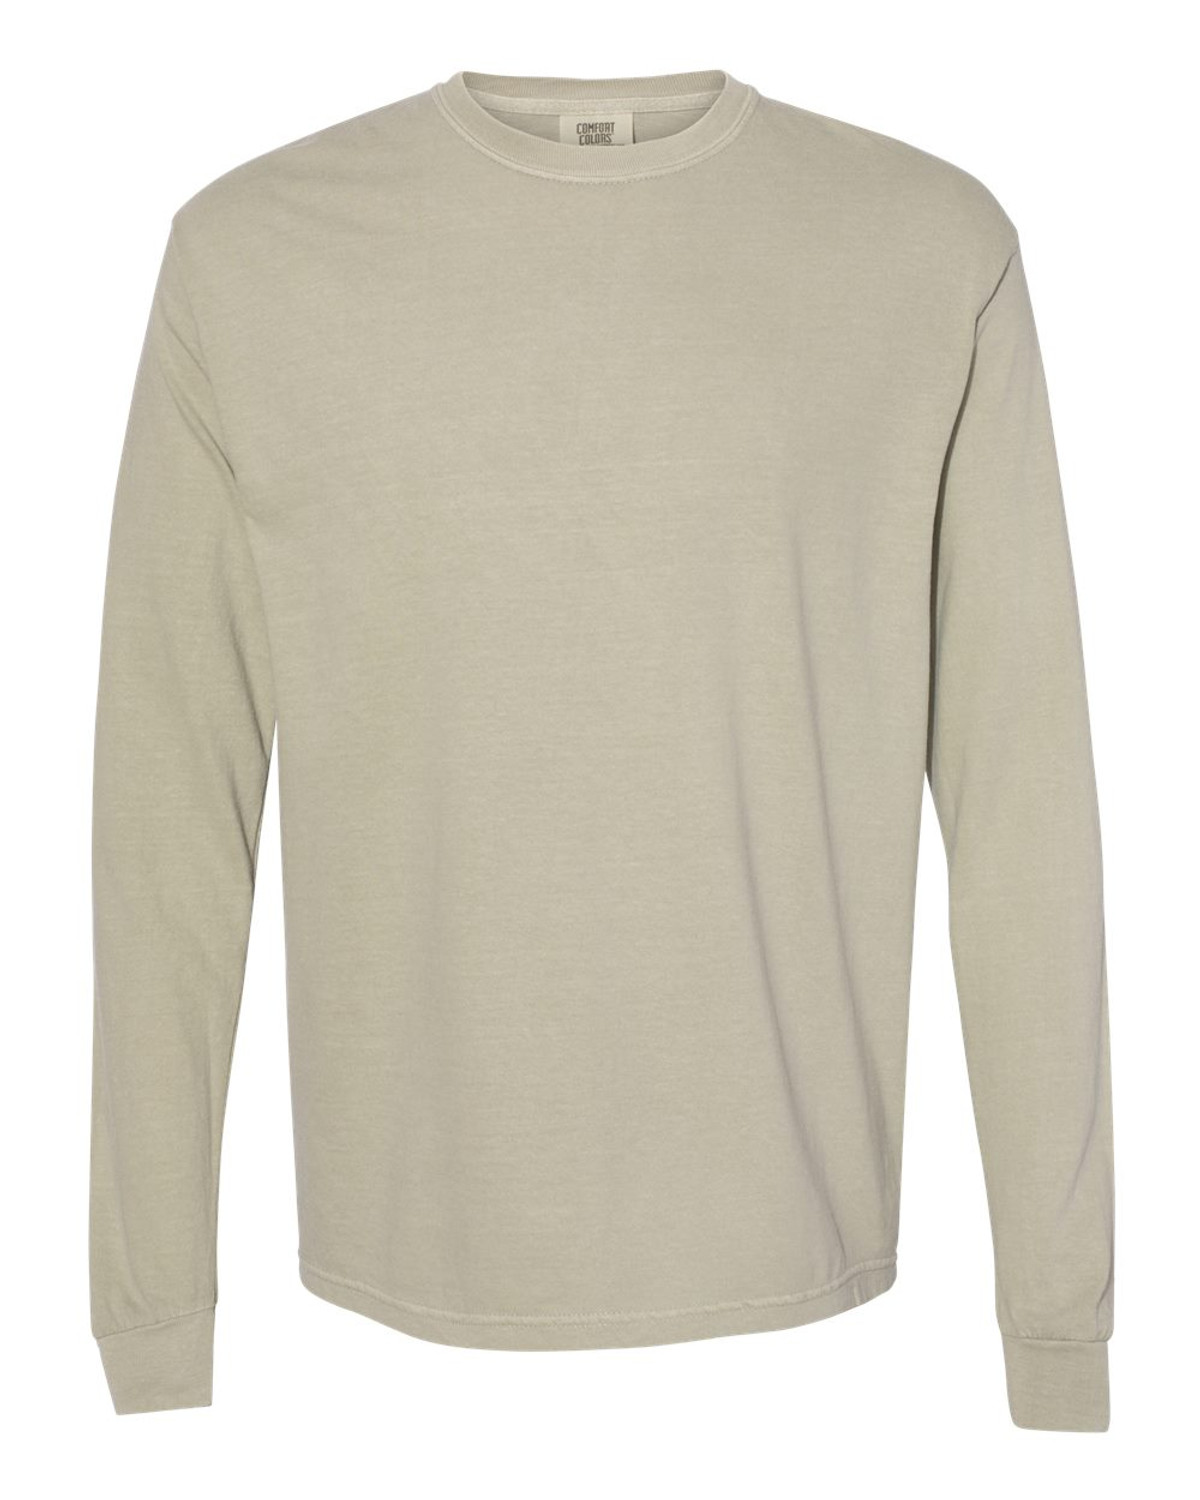 https://cdn11.bigcommerce.com/s-405b0/images/stencil/1500x1500/products/1572/23296/6014-comfort-colors-long-sleeve-tee-tshirt.ca-sandstone__69855.1708383398.jpg?c=2?imbypass=on